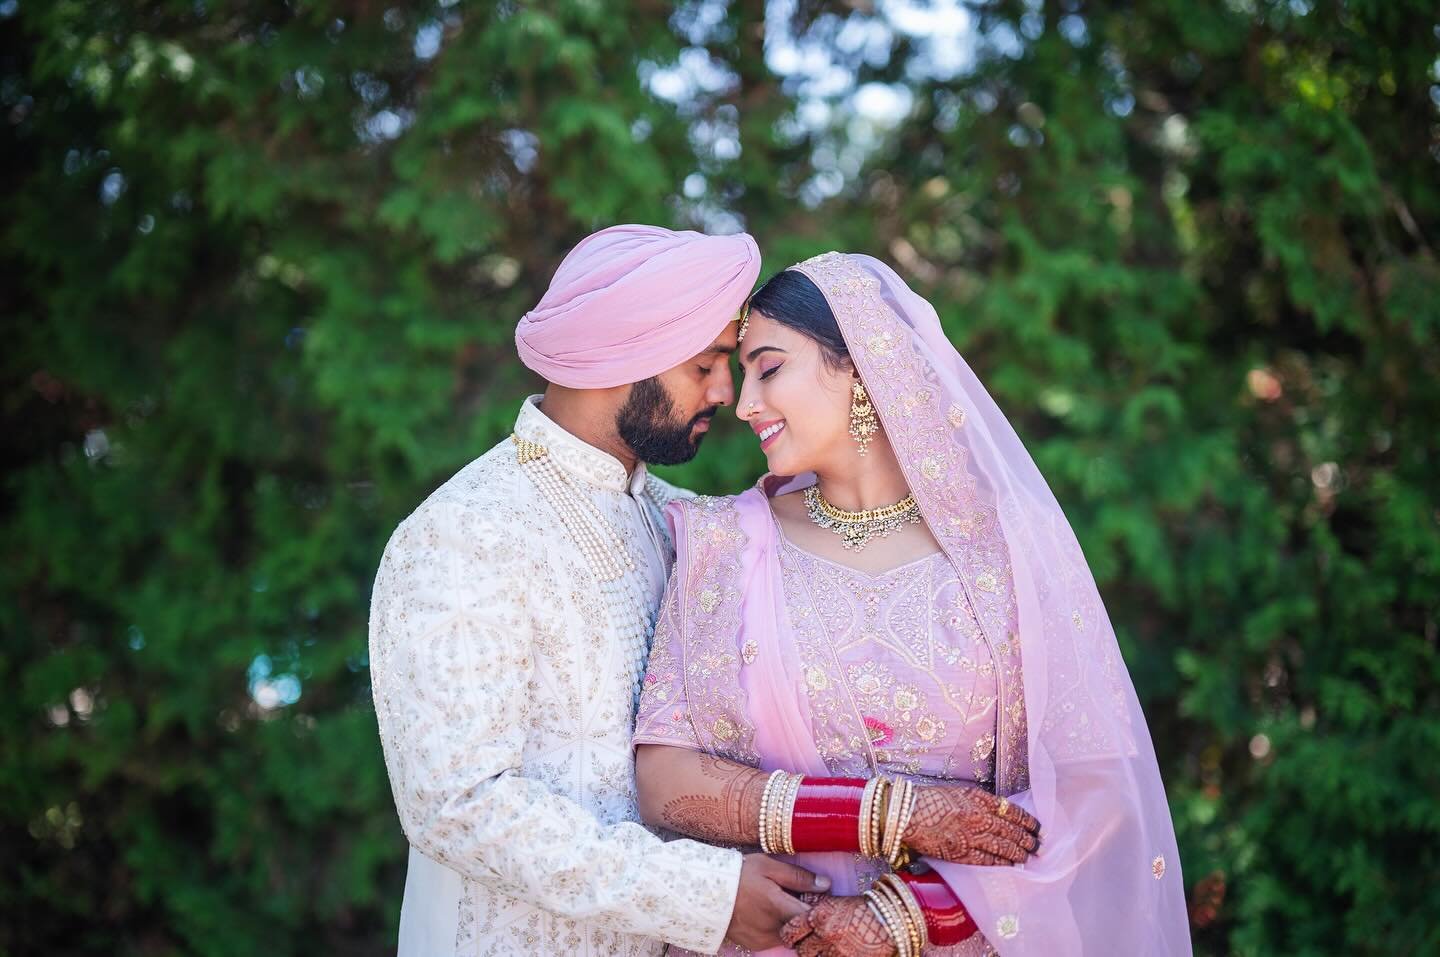 Sometimes I wish we could go back in life. Not to change things but to feel a couple things twice. 

#jsasuphotography 

#weddingphotography #dcweddings #weddingvibes #dcphotographers #dcweddingphotography #desifashion #desiweddings #desibrides #indi